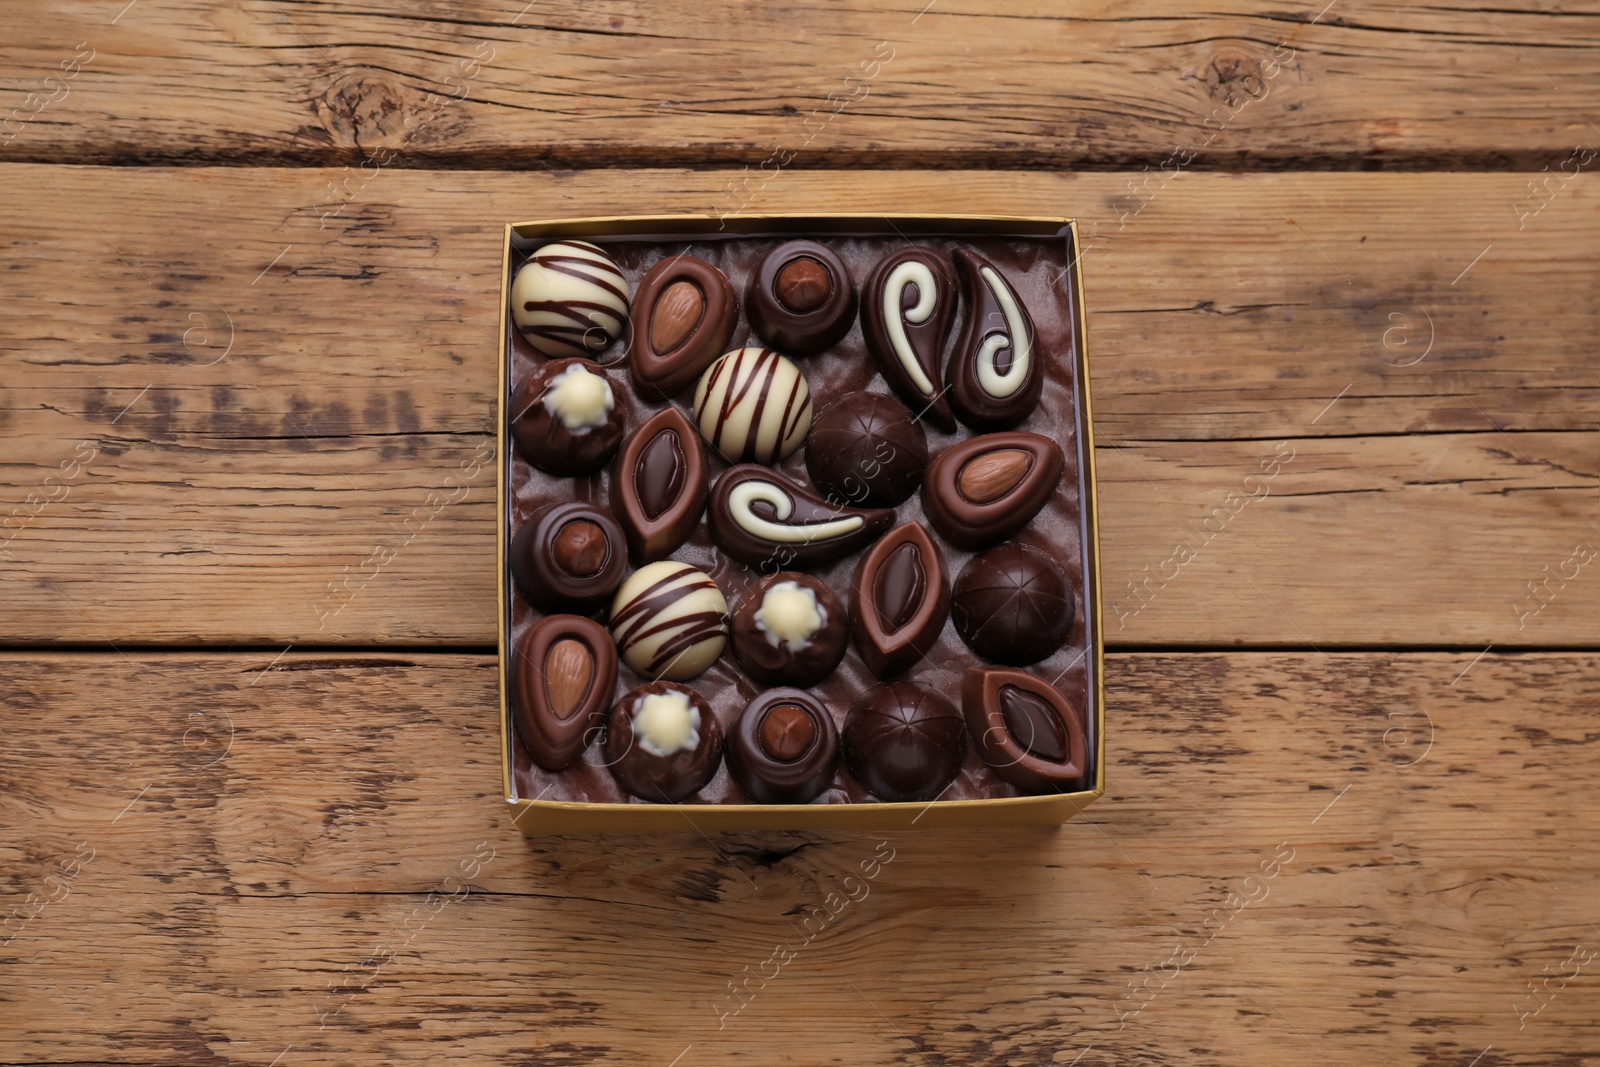 Photo of Box of delicious chocolate candies on wooden table, top view